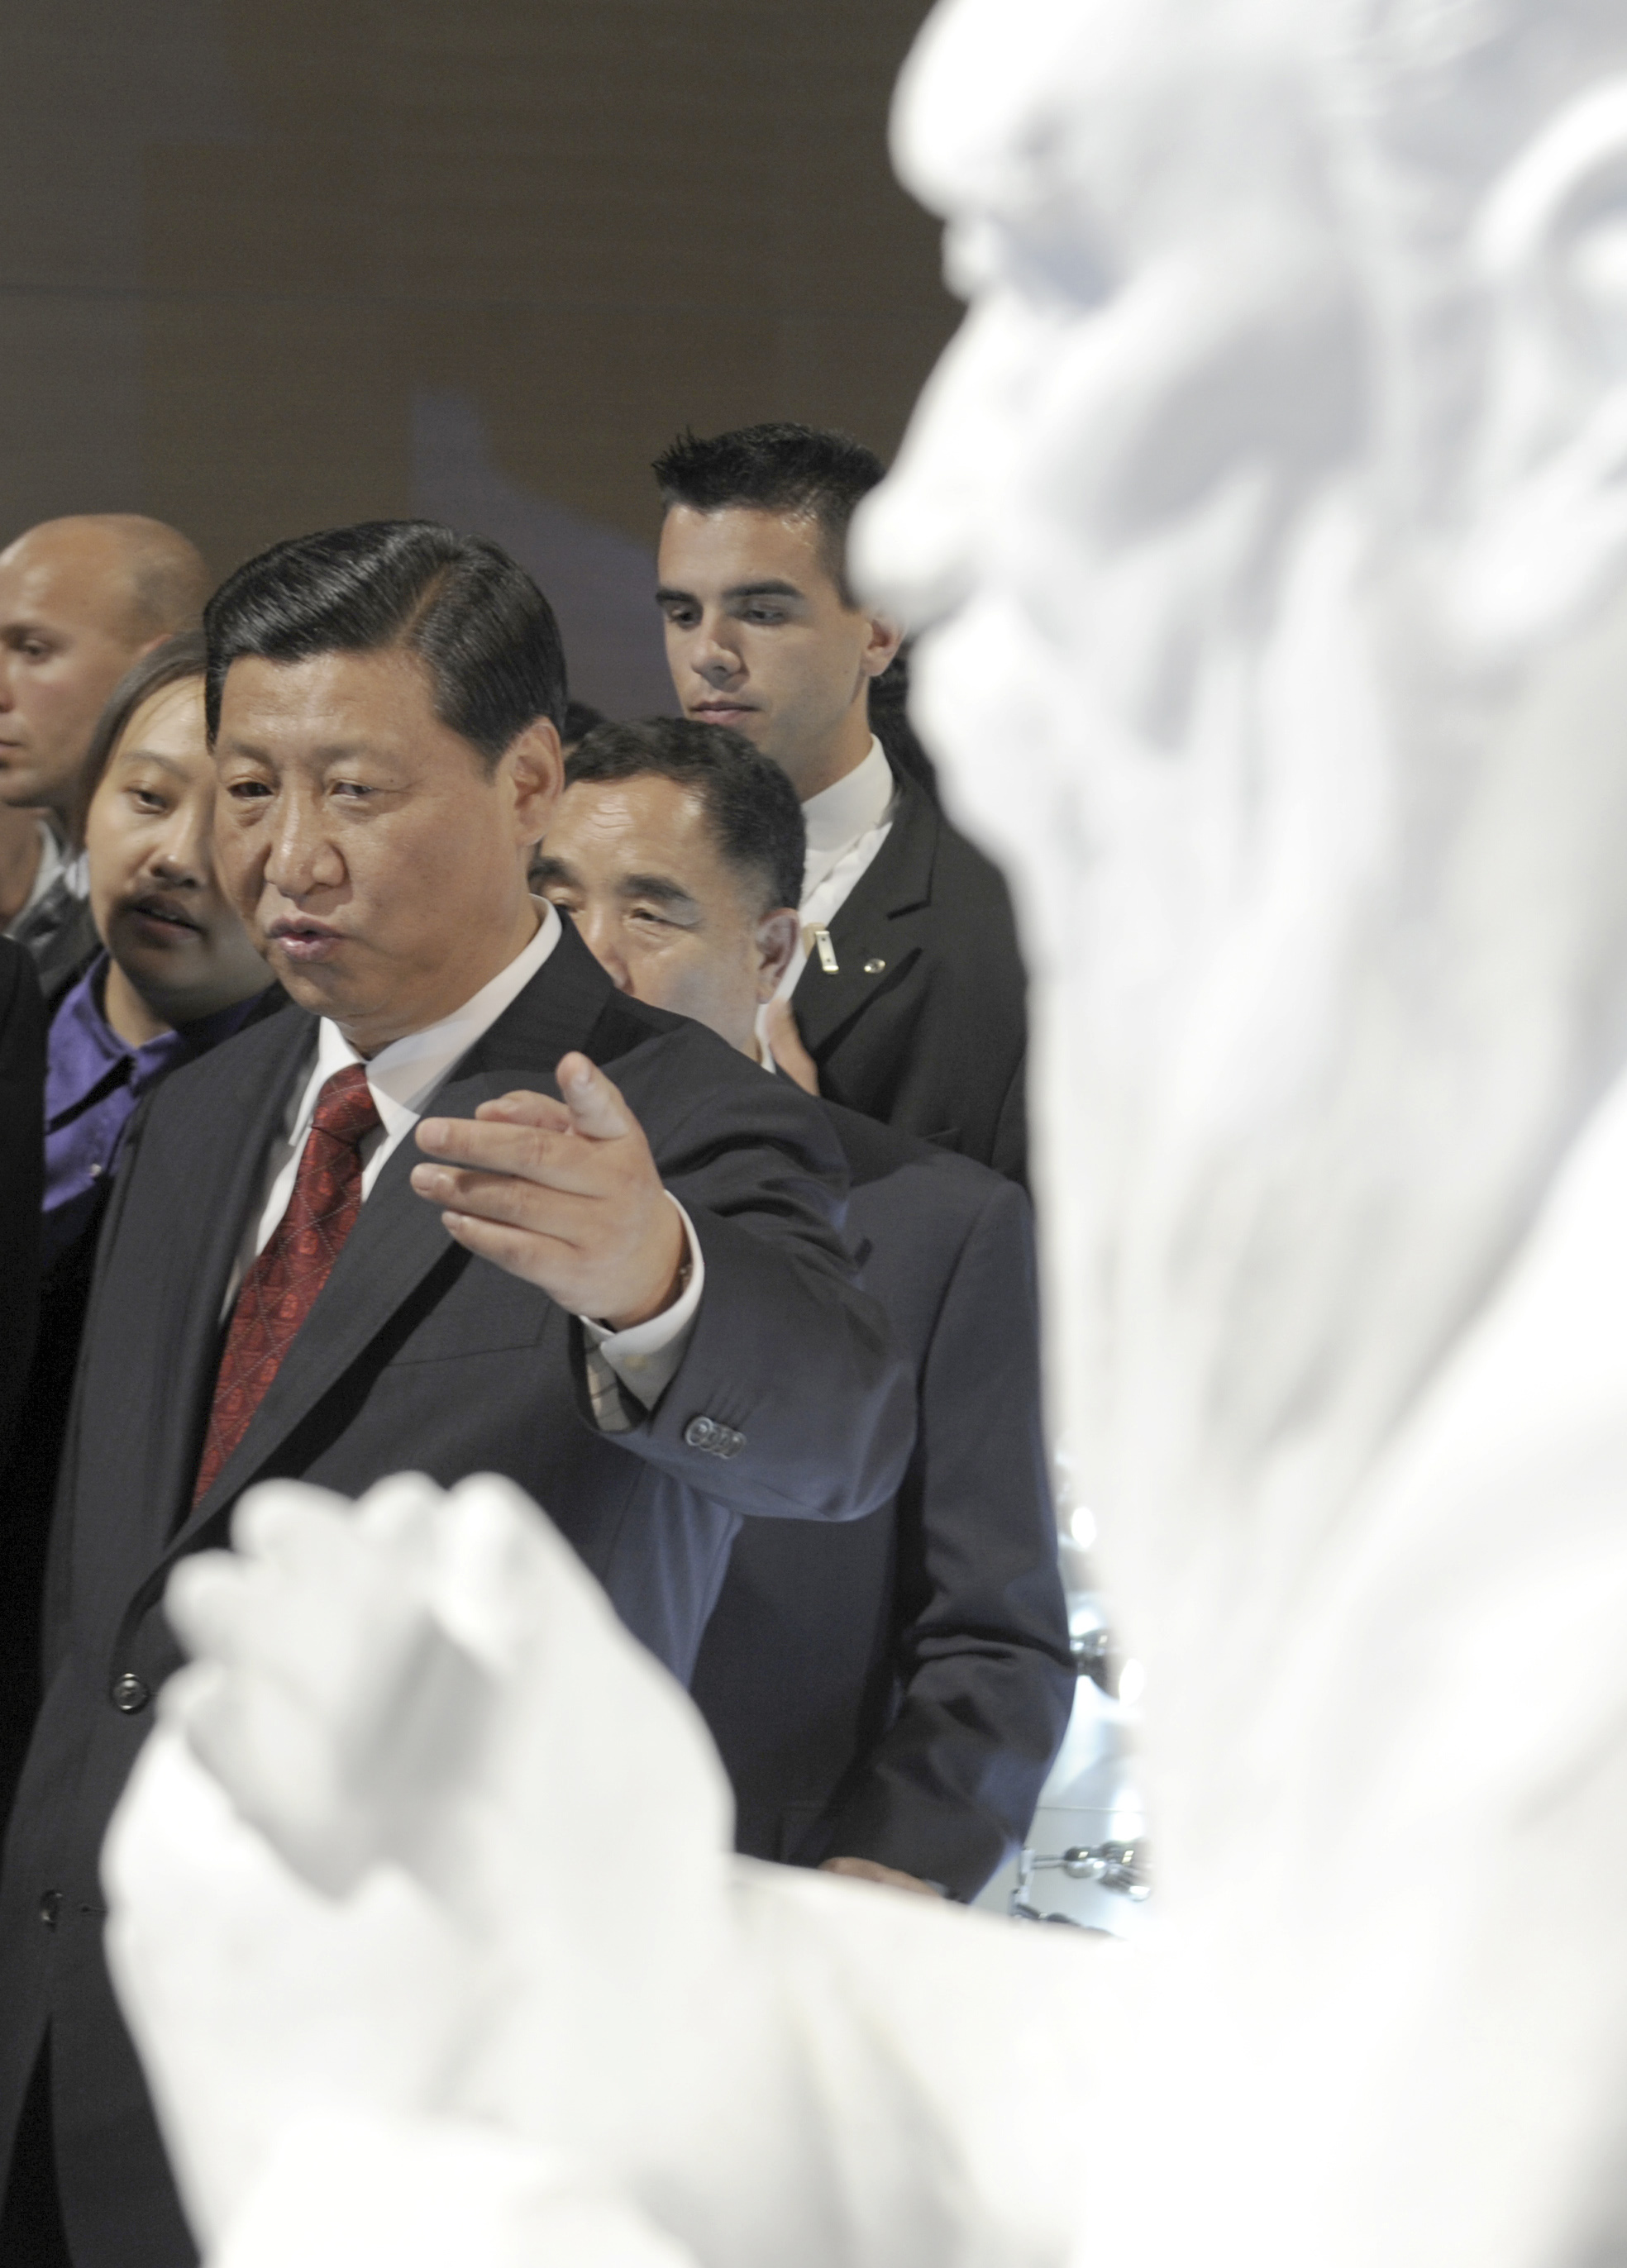 Xi Jinping, now Chinese President, points at a bust of Confucius in the China pavilion of Frankfurt Book Fair he attended while still serving as Vice President on Oct. 13, 2009 (Boris Roessler—Reuters)